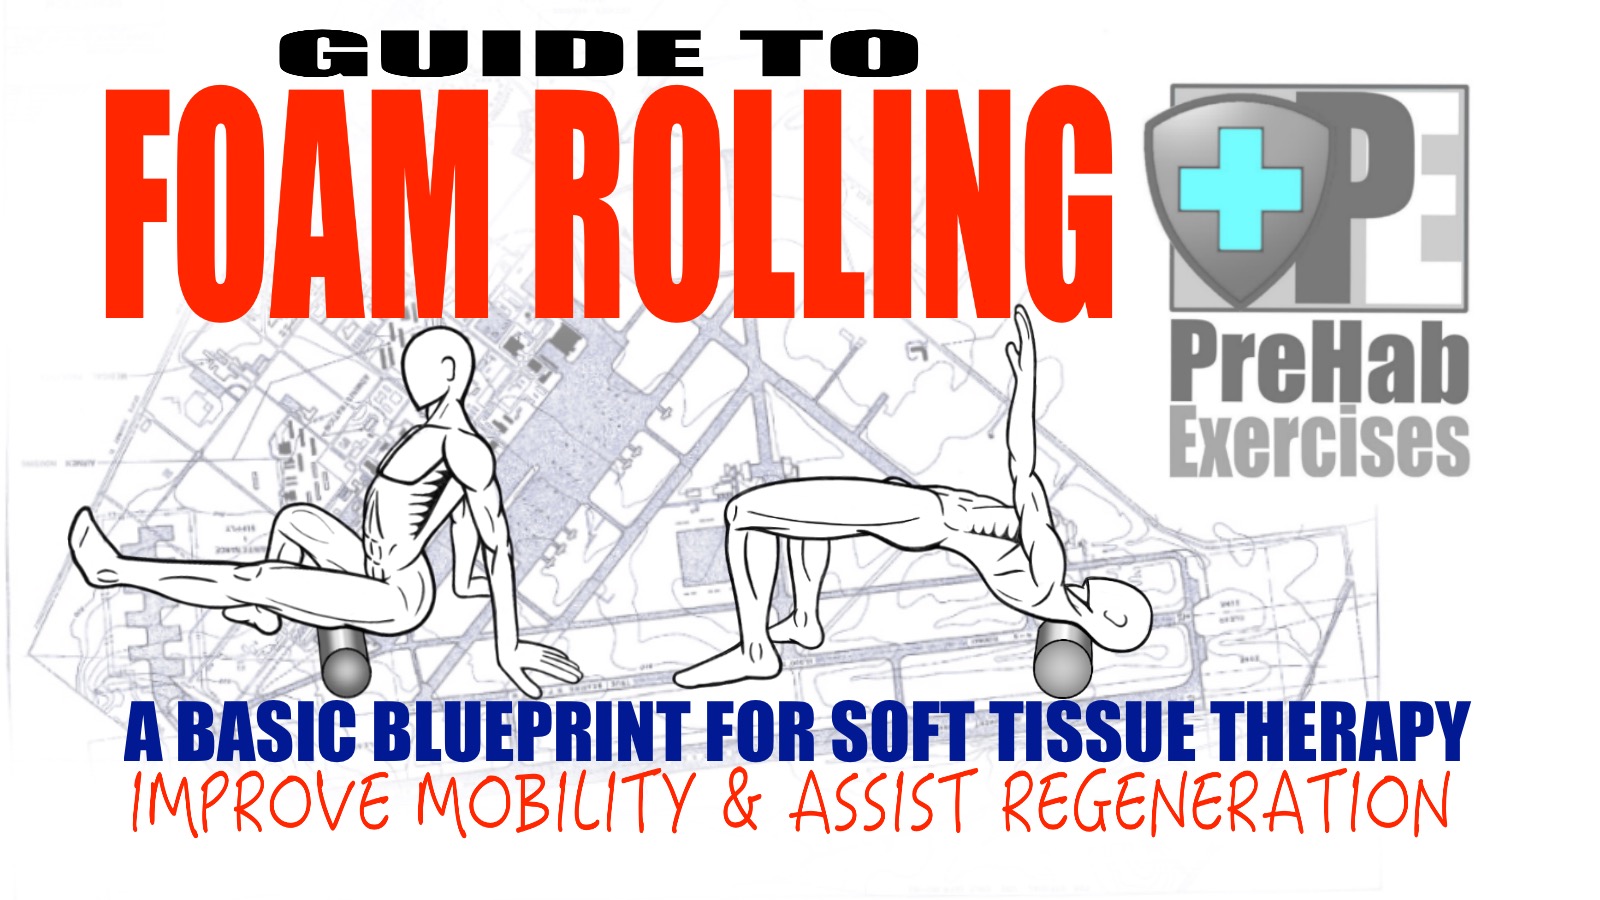 Guide to Foam Rolling – A Basic Blueprint for Soft Tissue Therapy